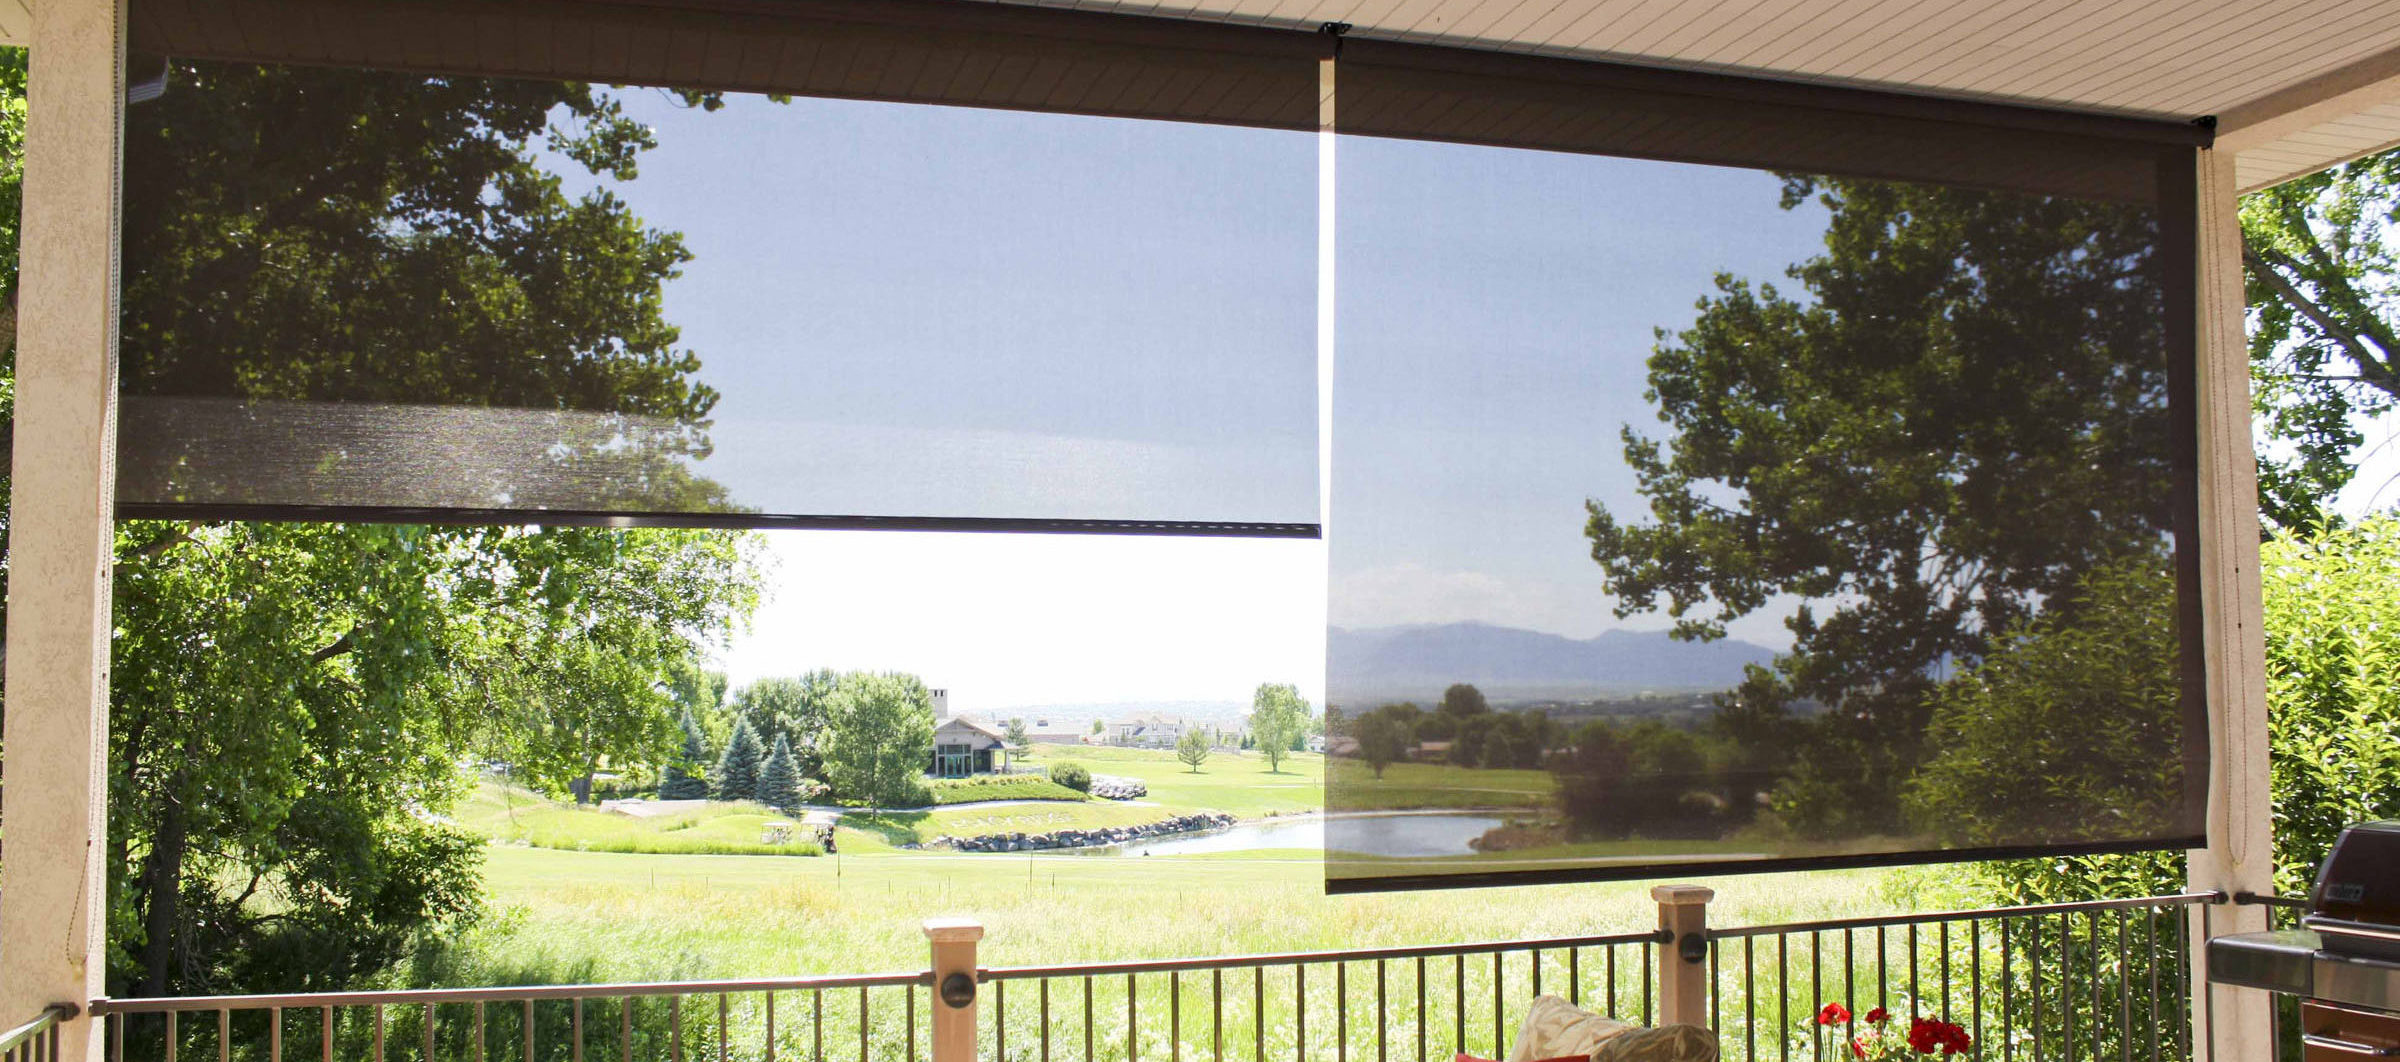 Oasis® 2600 Patio Shades - Insolroll